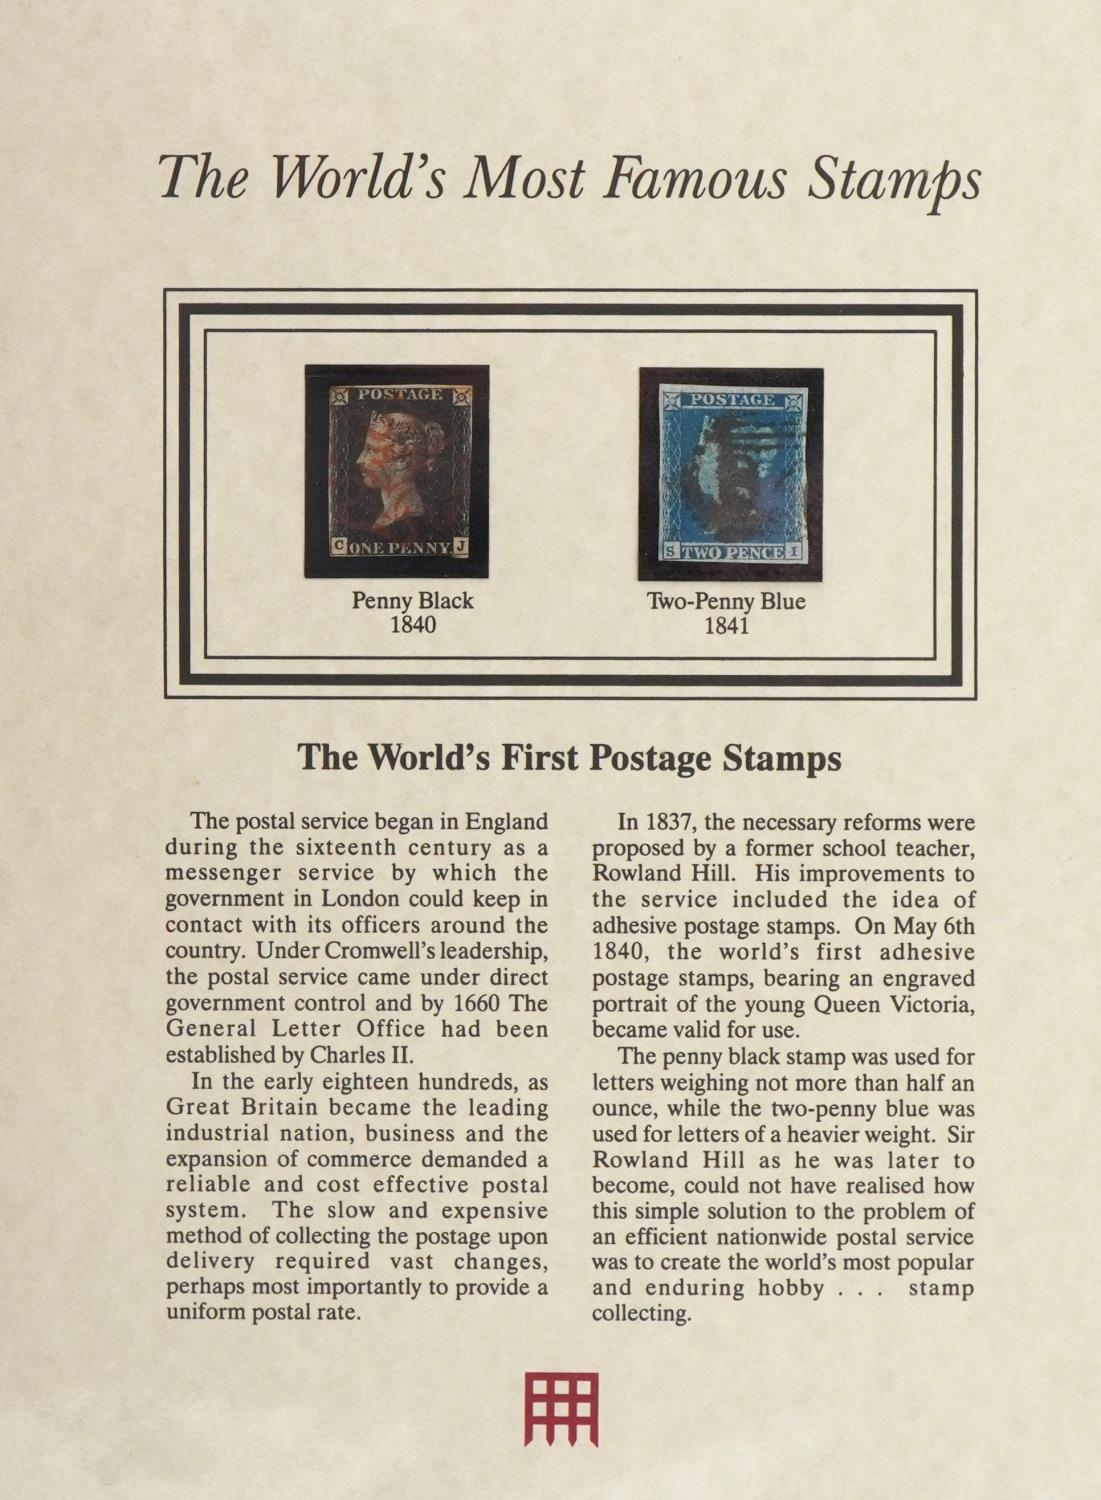 The World's Most Famous Stamps by The Westminster Collection comprising Penny Black and Two Penny